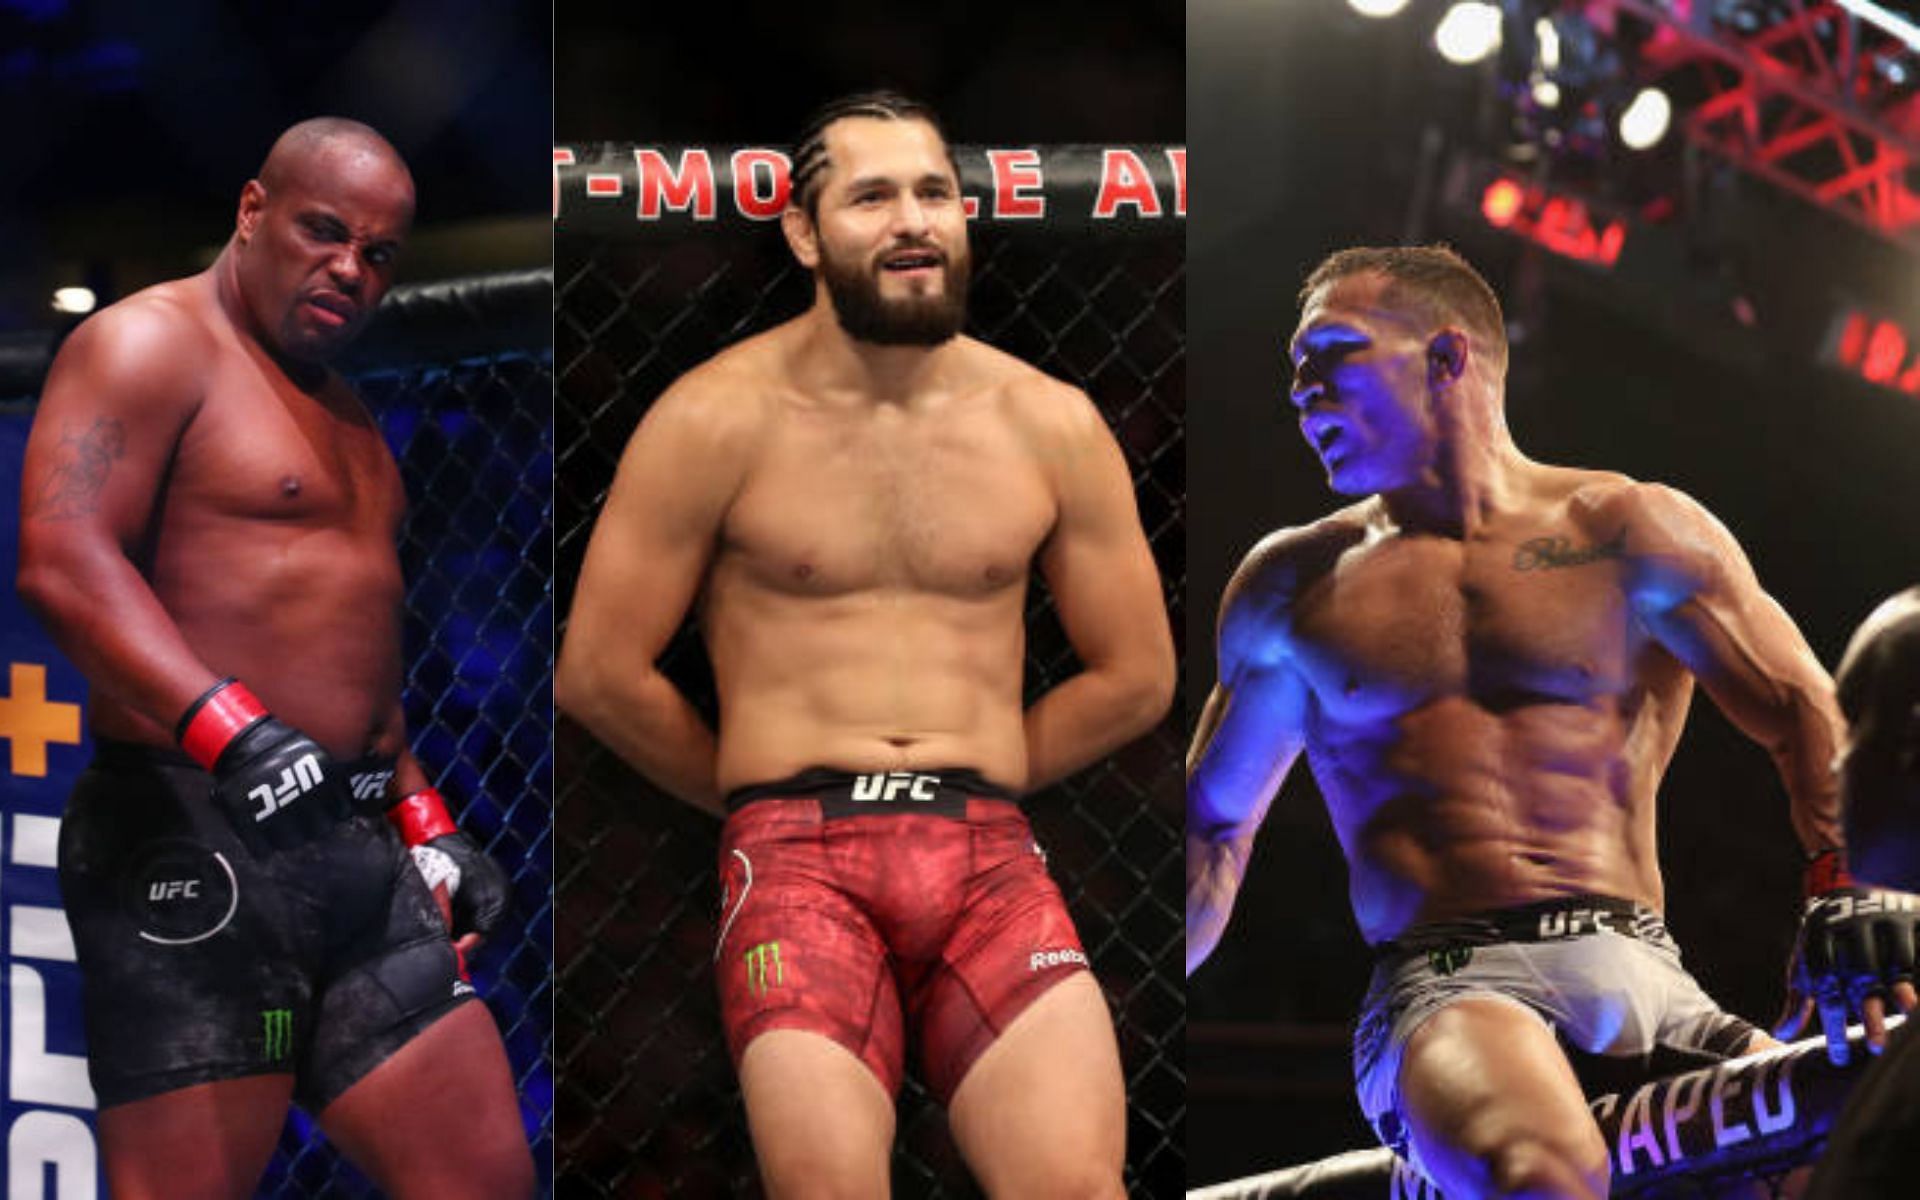 From left to right: Daniel Cormier, Jorge Masvidal, Michael Chandler